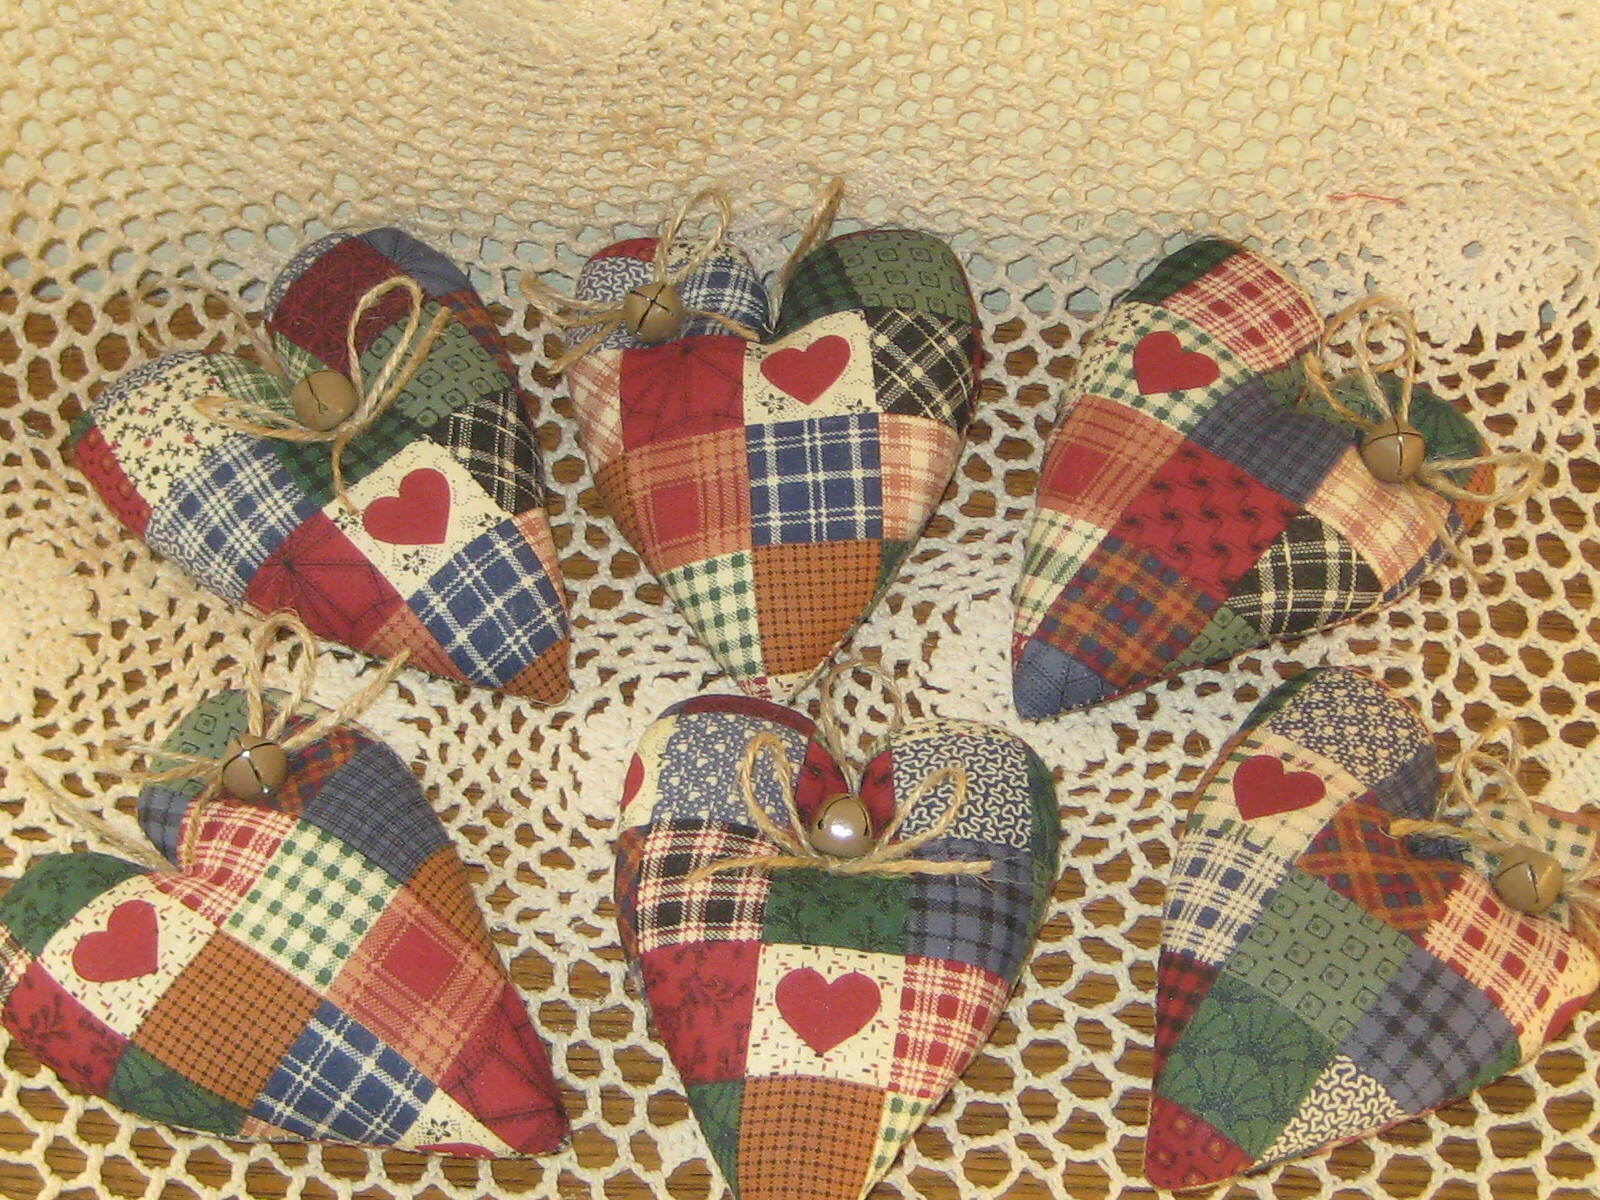 Country Decor 6 Patchwork Fabric Hearts Wreath Accents Handmade Valentine Gifts